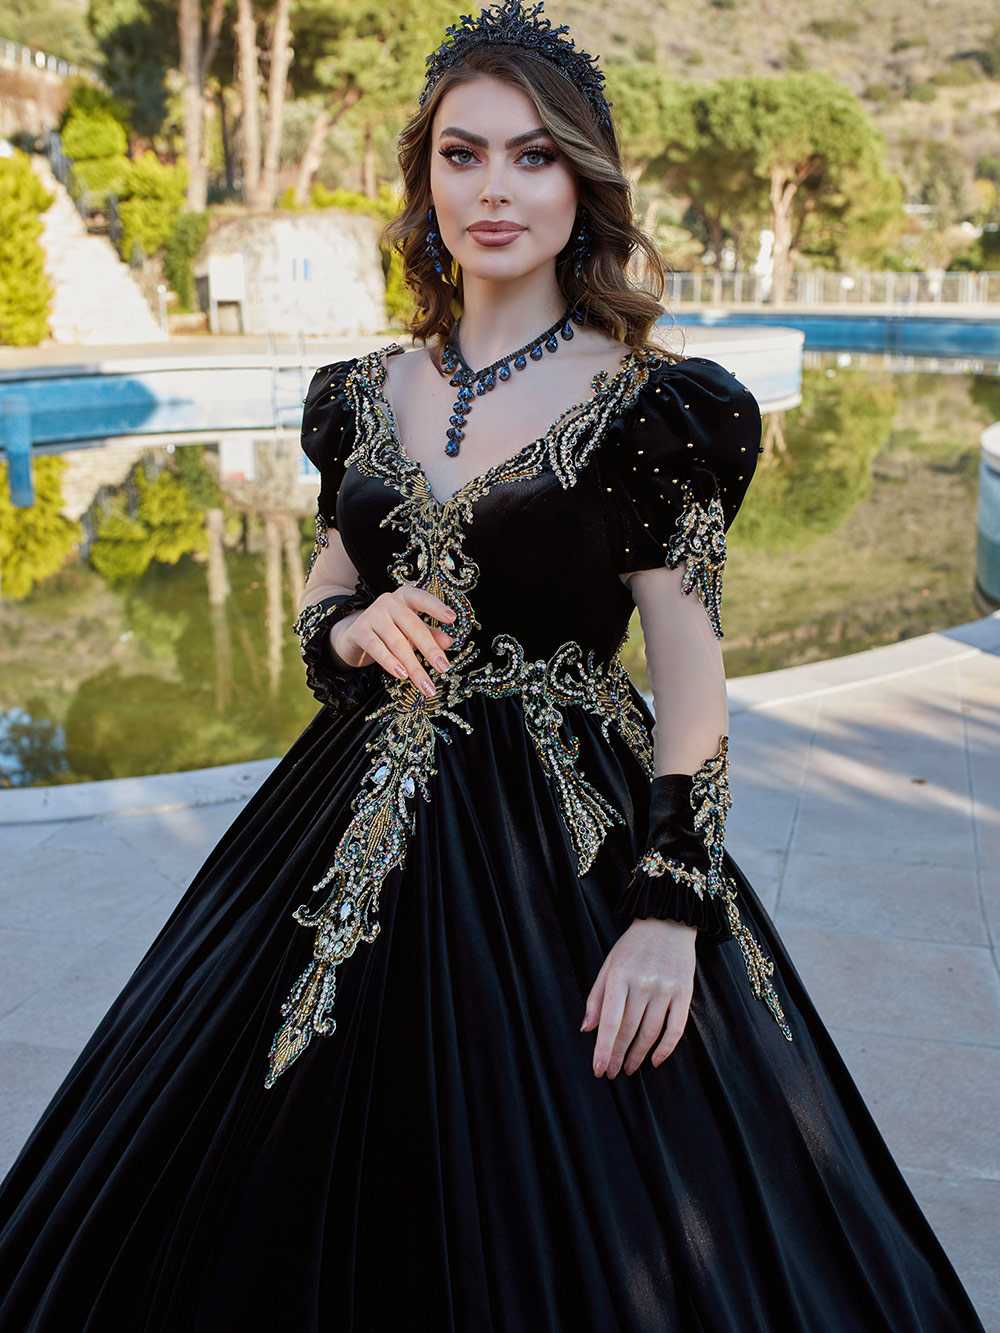 Ball Gowns To Consider When Attending A Ball Party. | Boombuzz